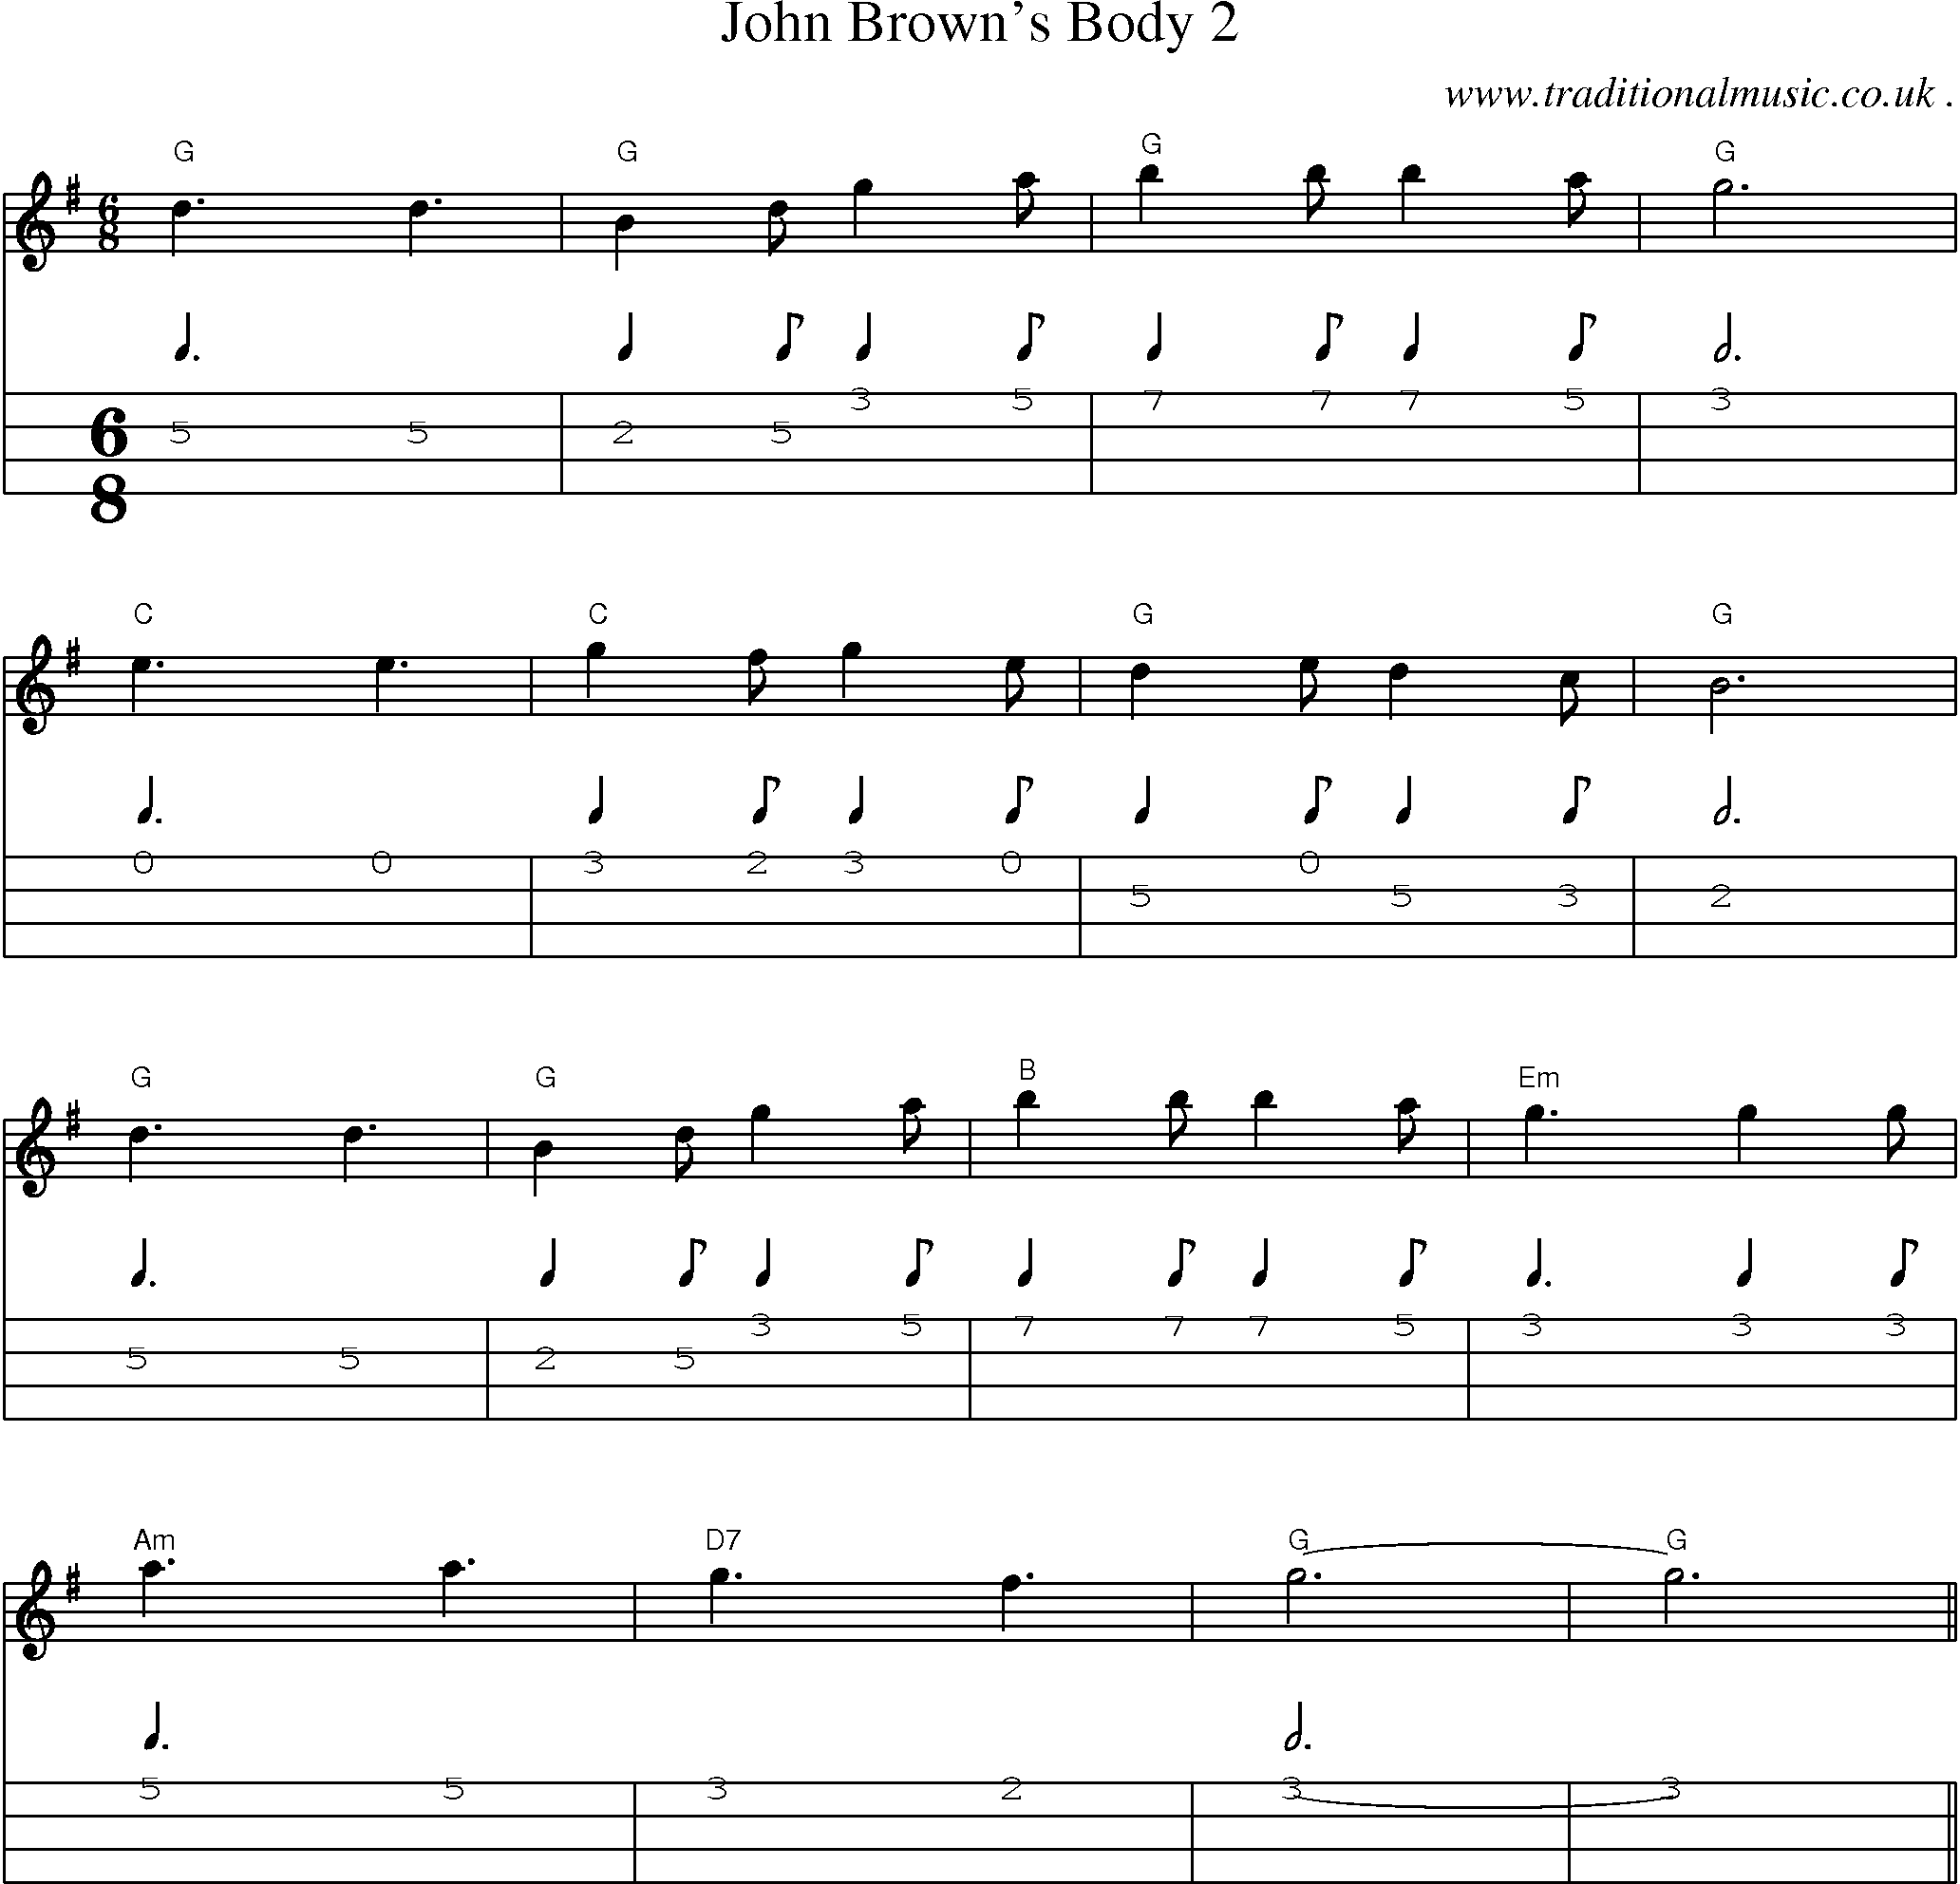 Music Score and Mandolin Tabs for John Browns Body 2